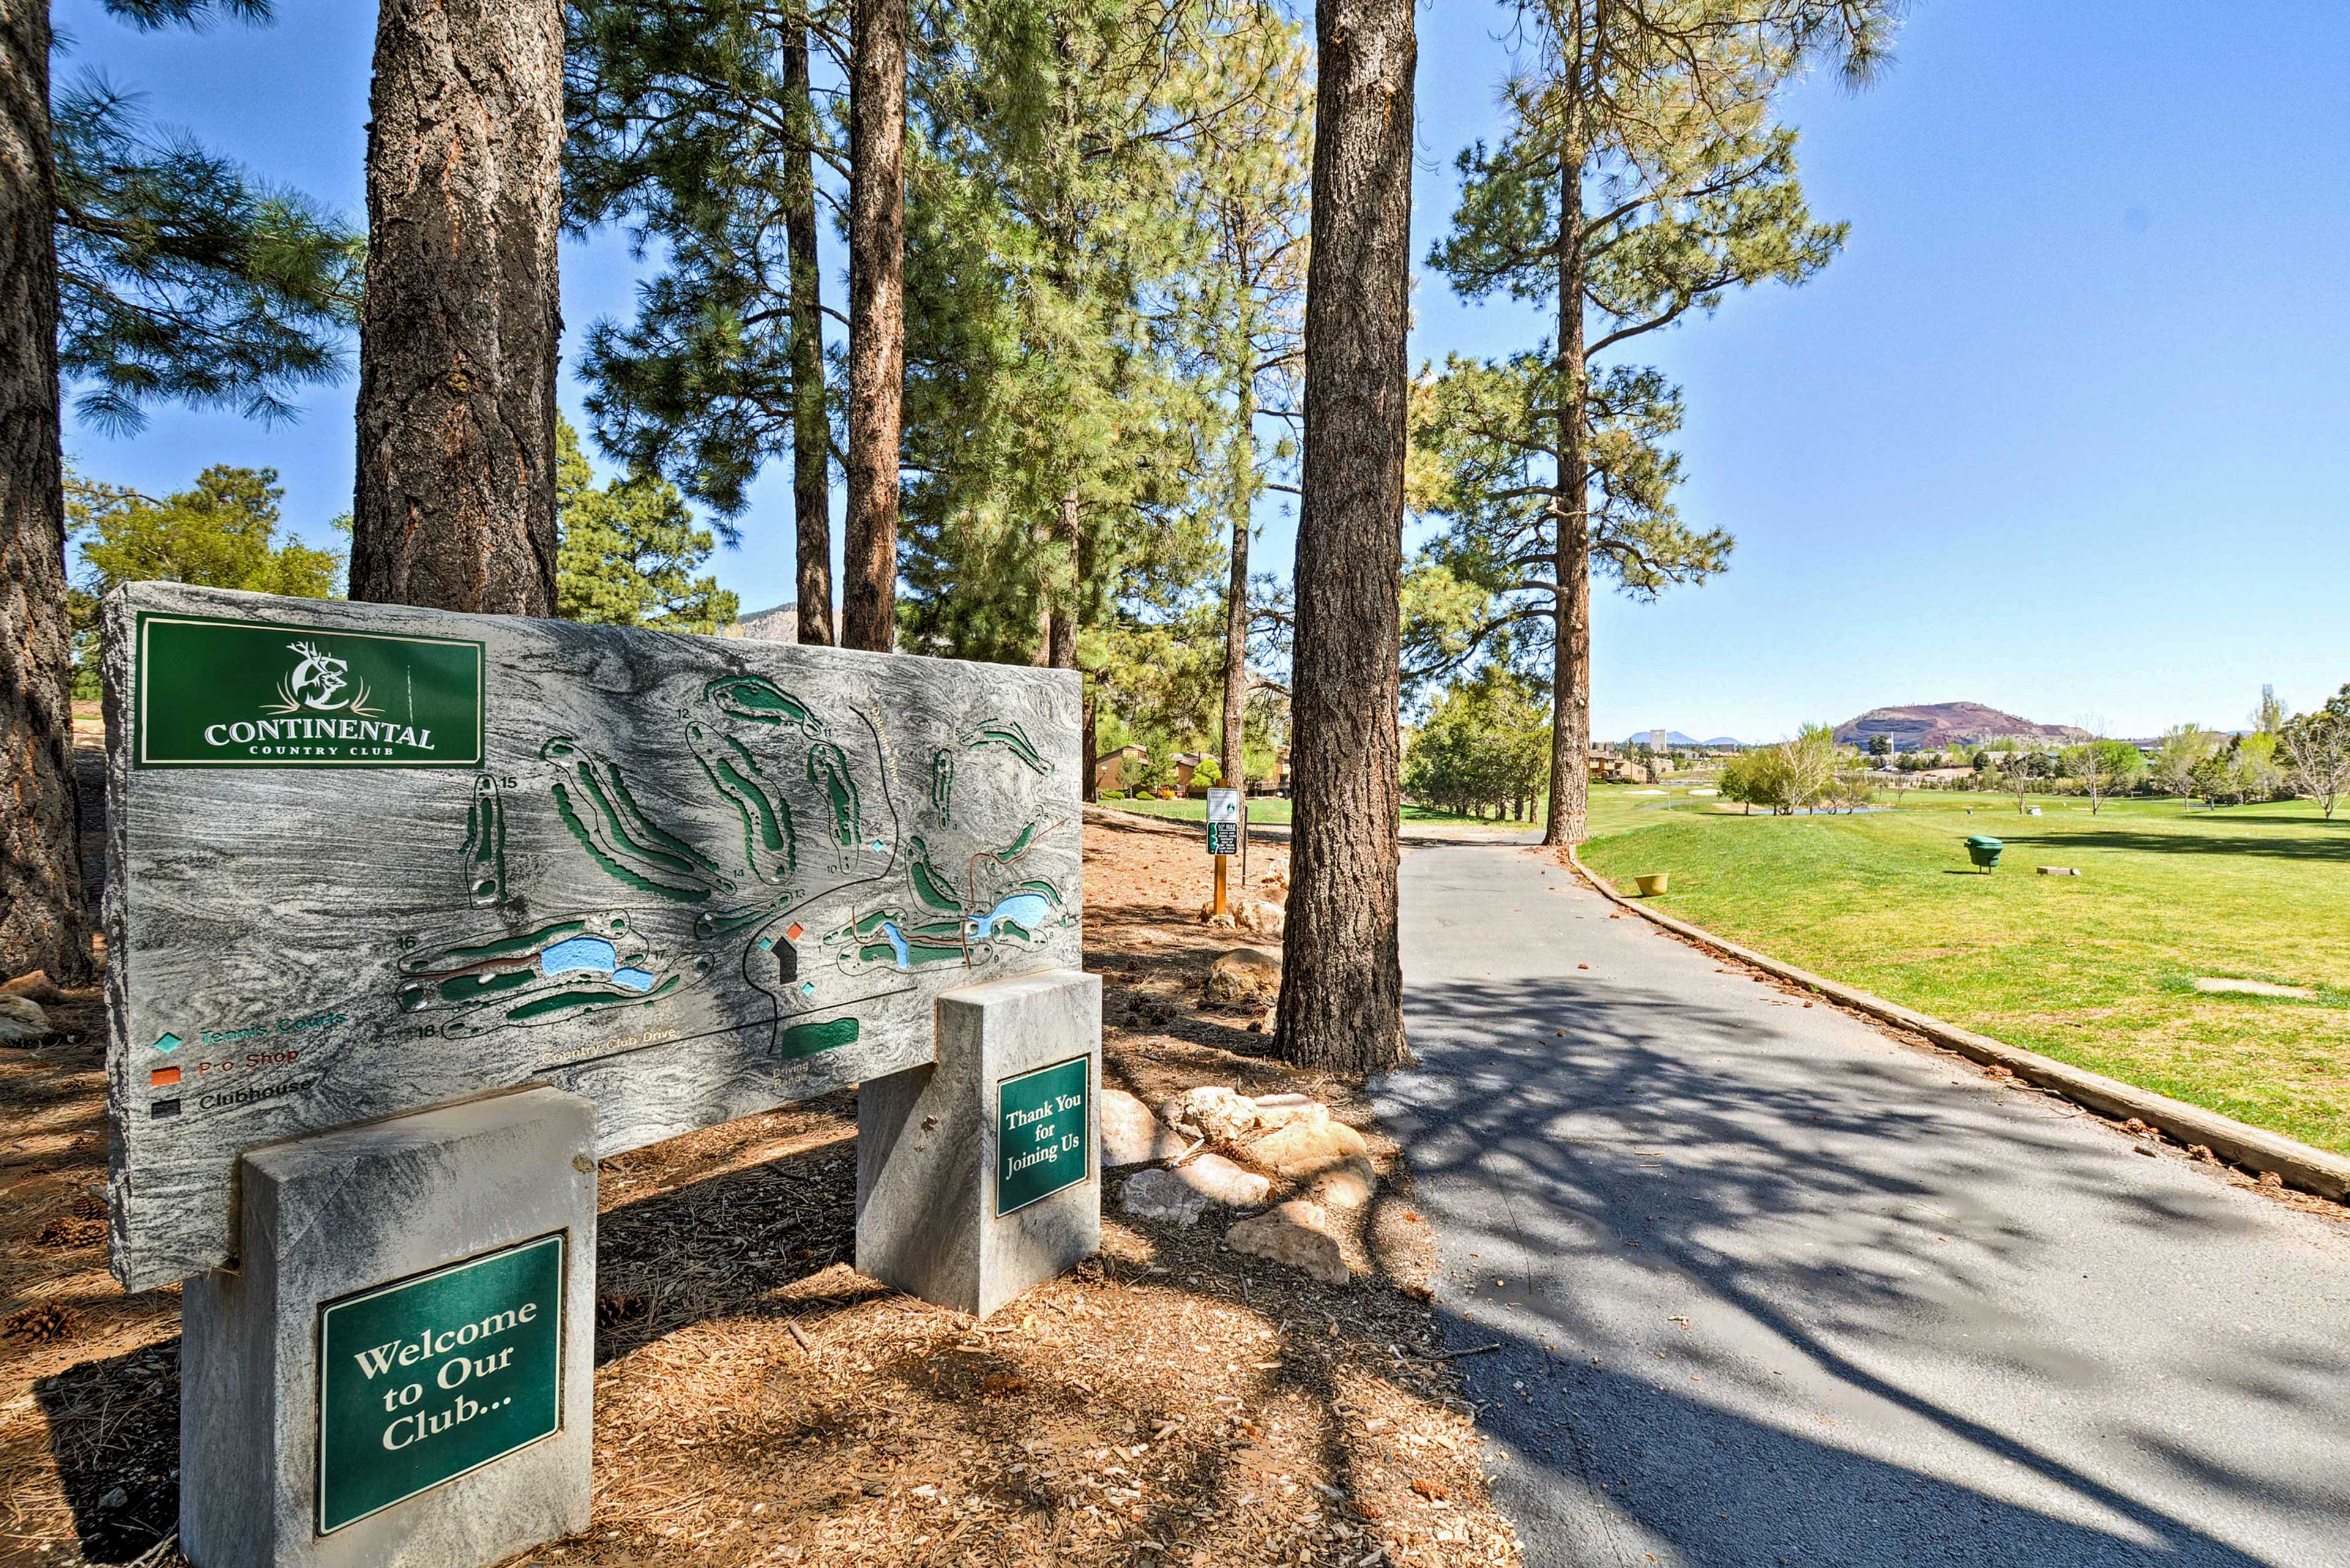 Access to Continental Country Club